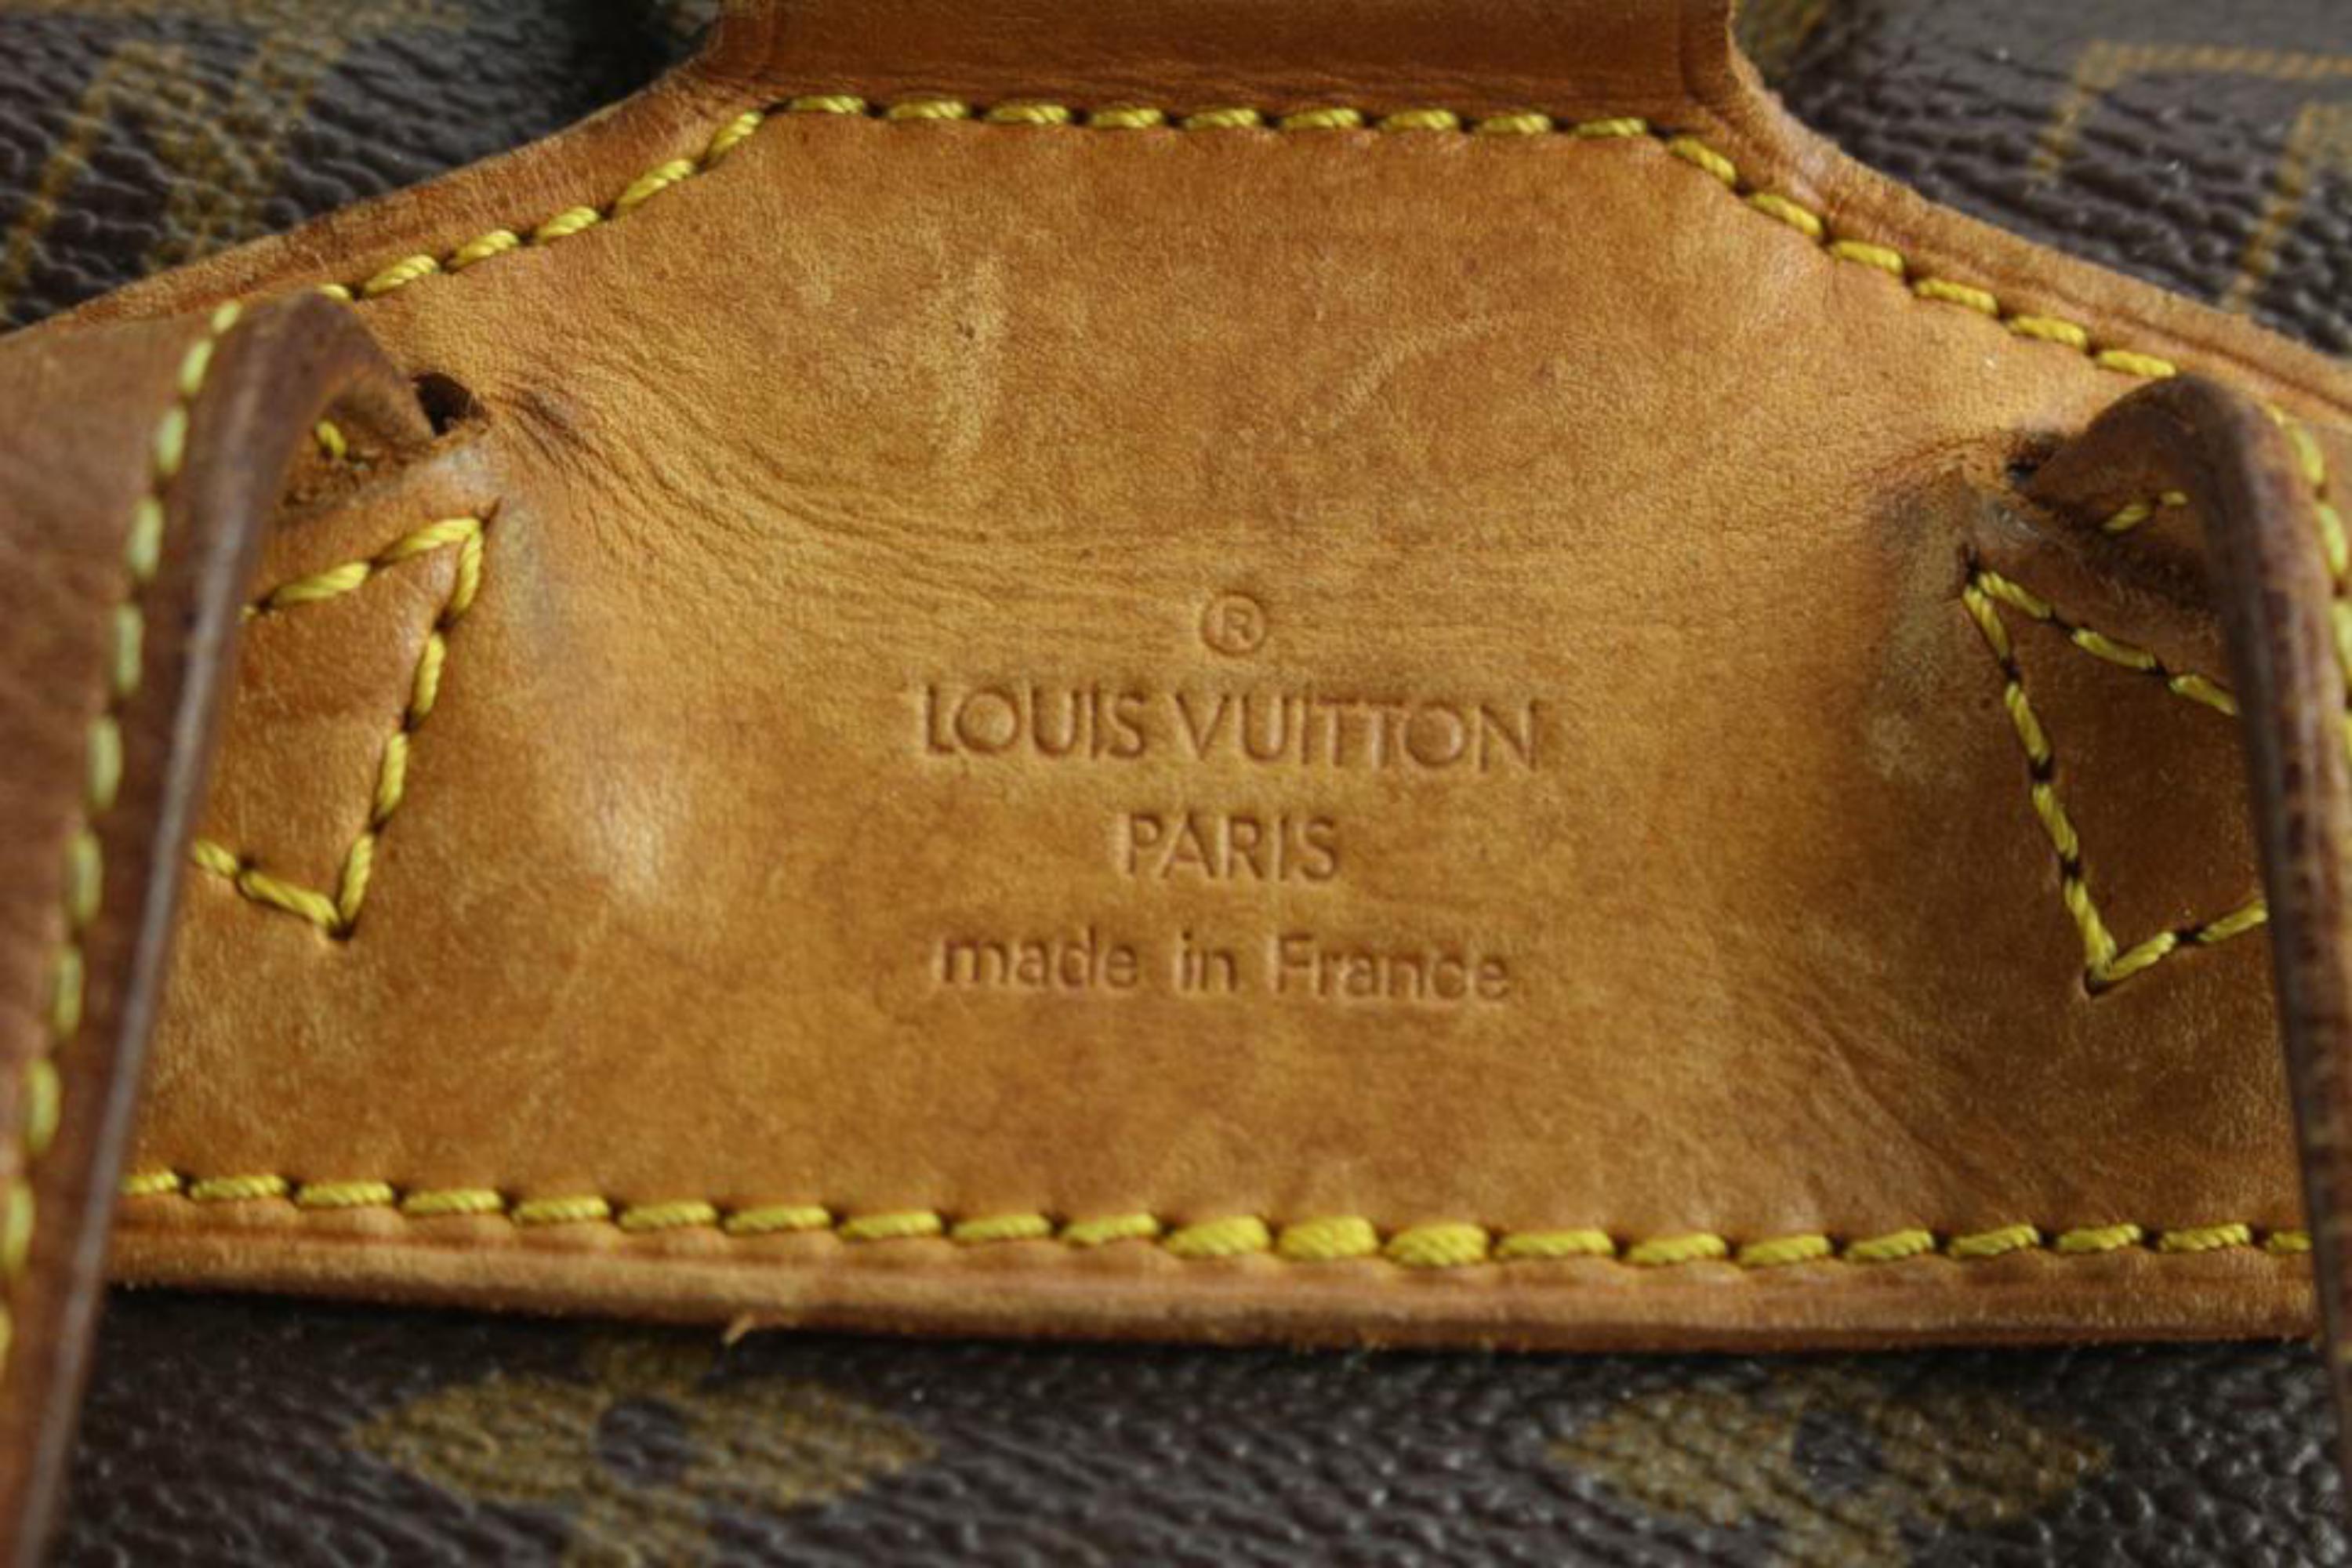 Louis Vuitton Monogram Montsouris MM Backpack 1216lv28 In Fair Condition For Sale In Dix hills, NY